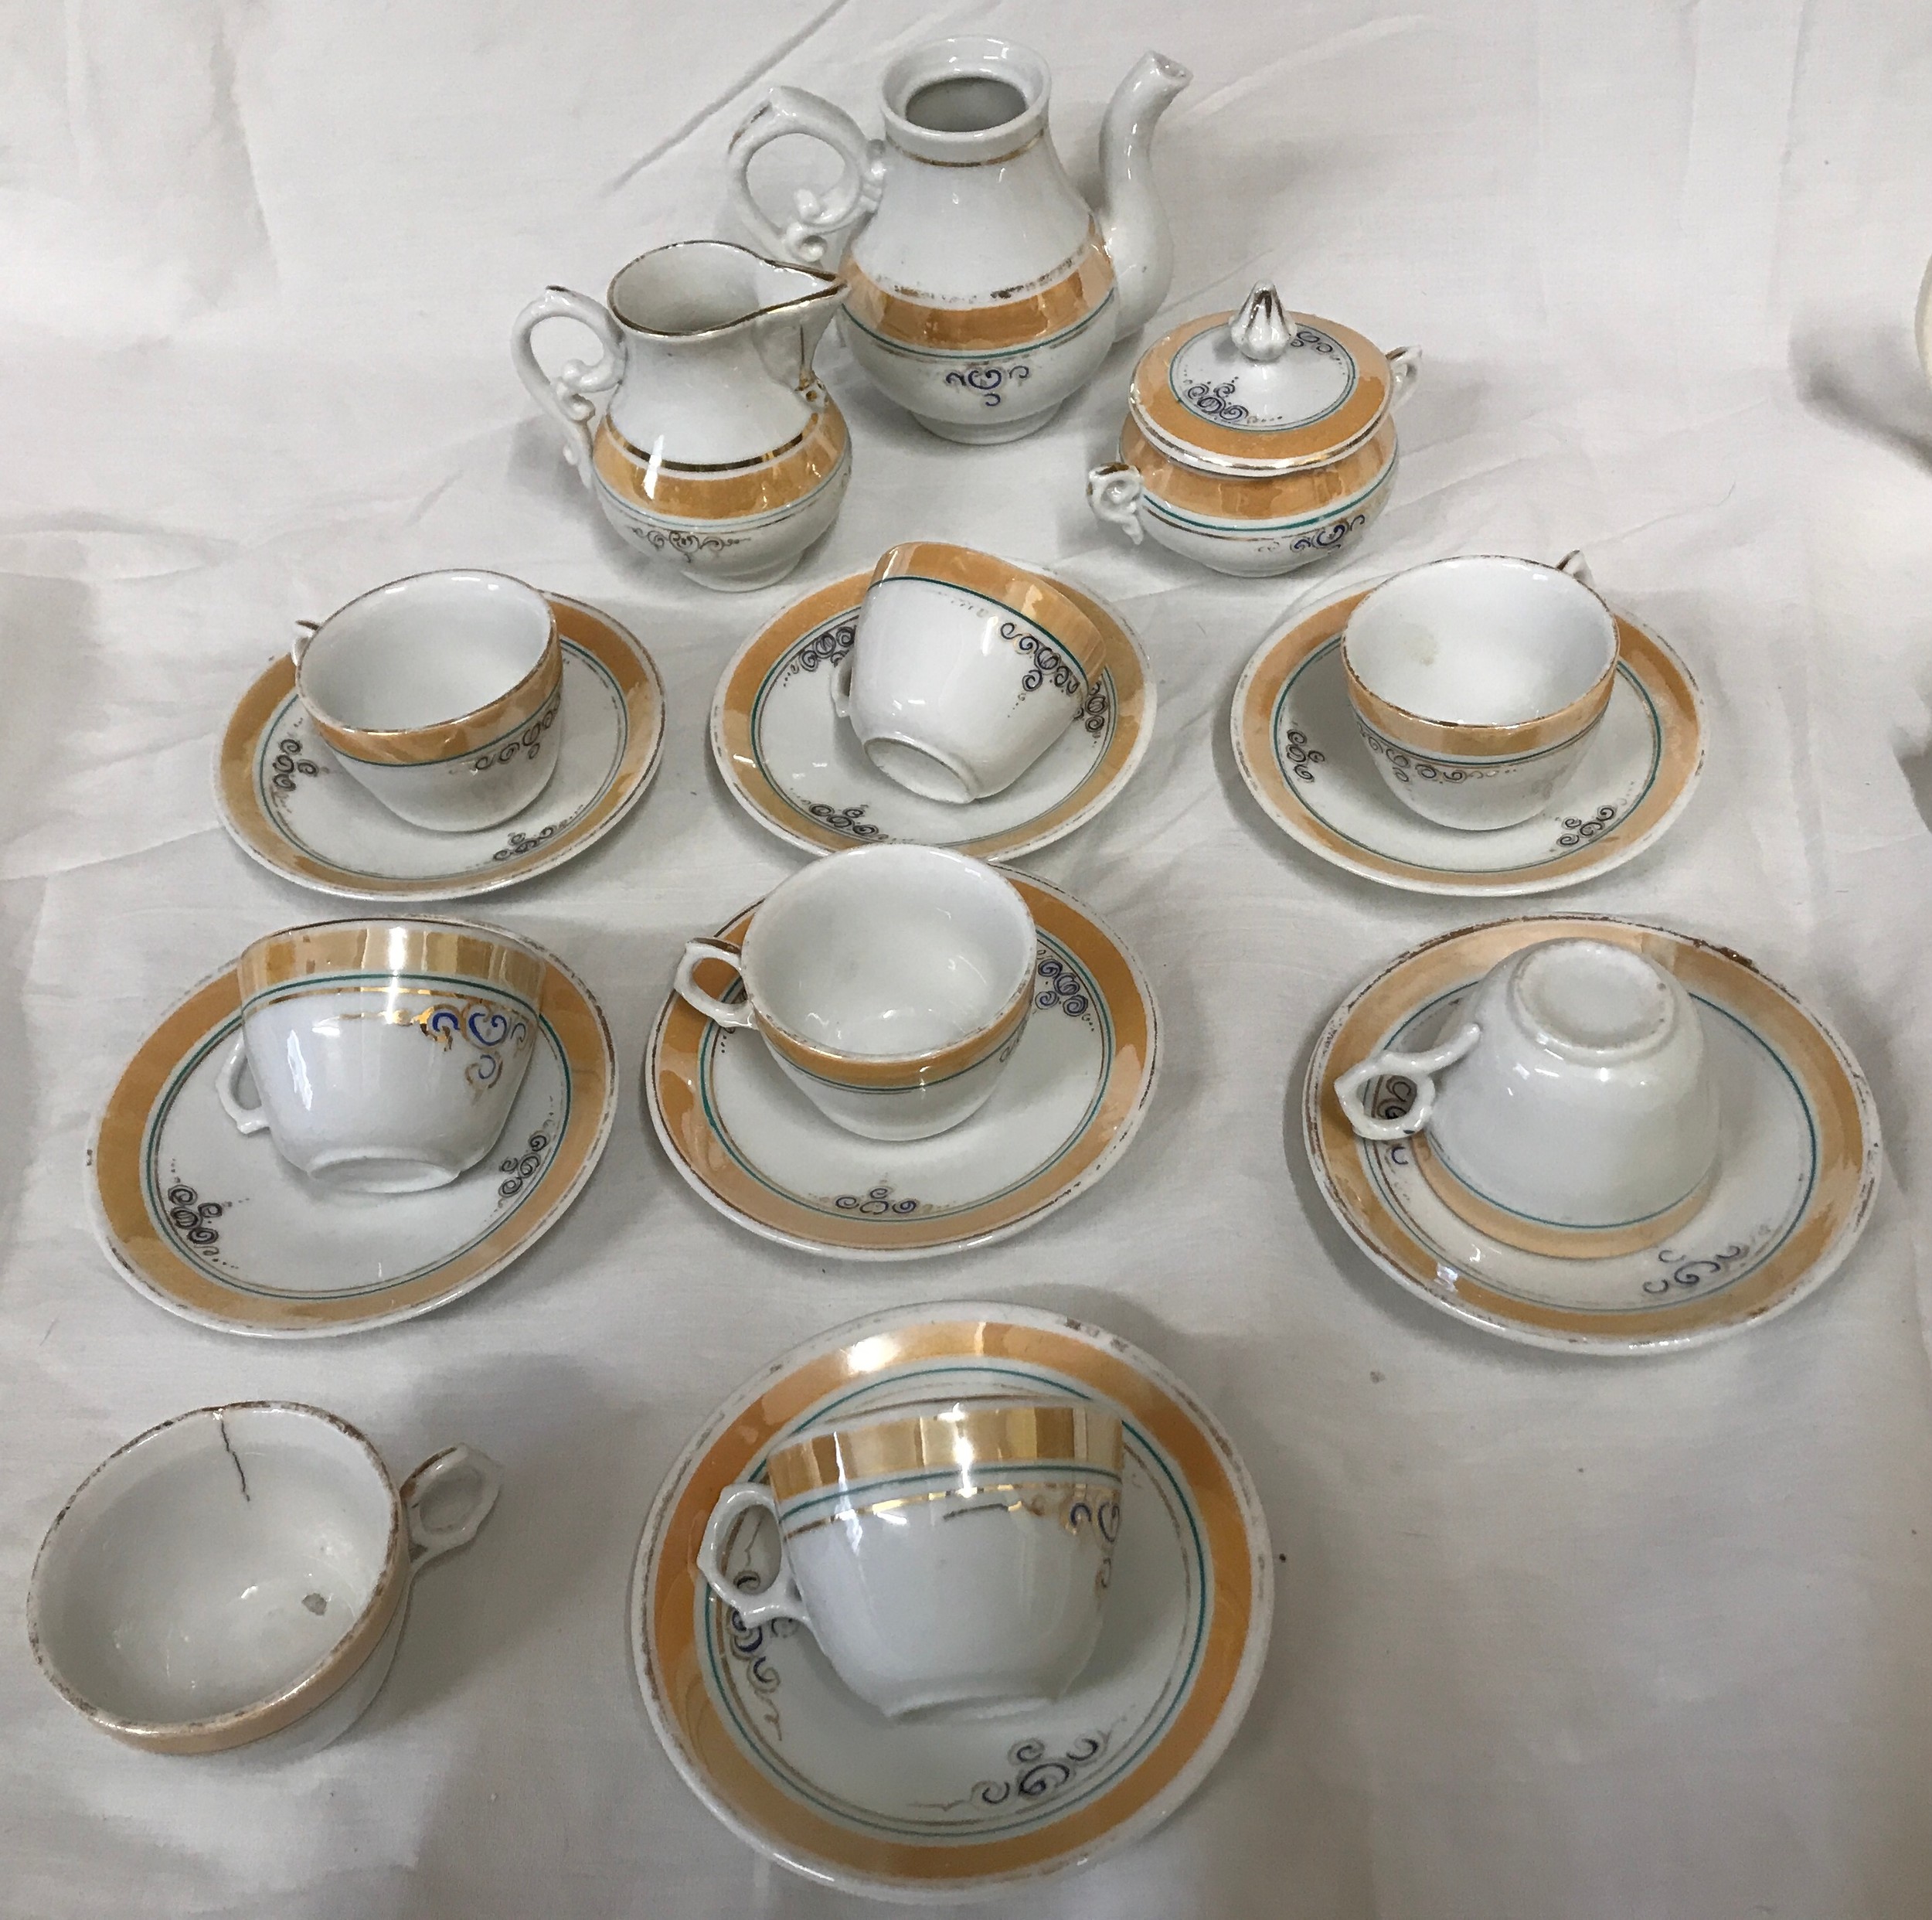 Two children's tea sets, one brown and gilt rimmed 18 pieces and one white pottery 9 pieces tea - Image 3 of 3